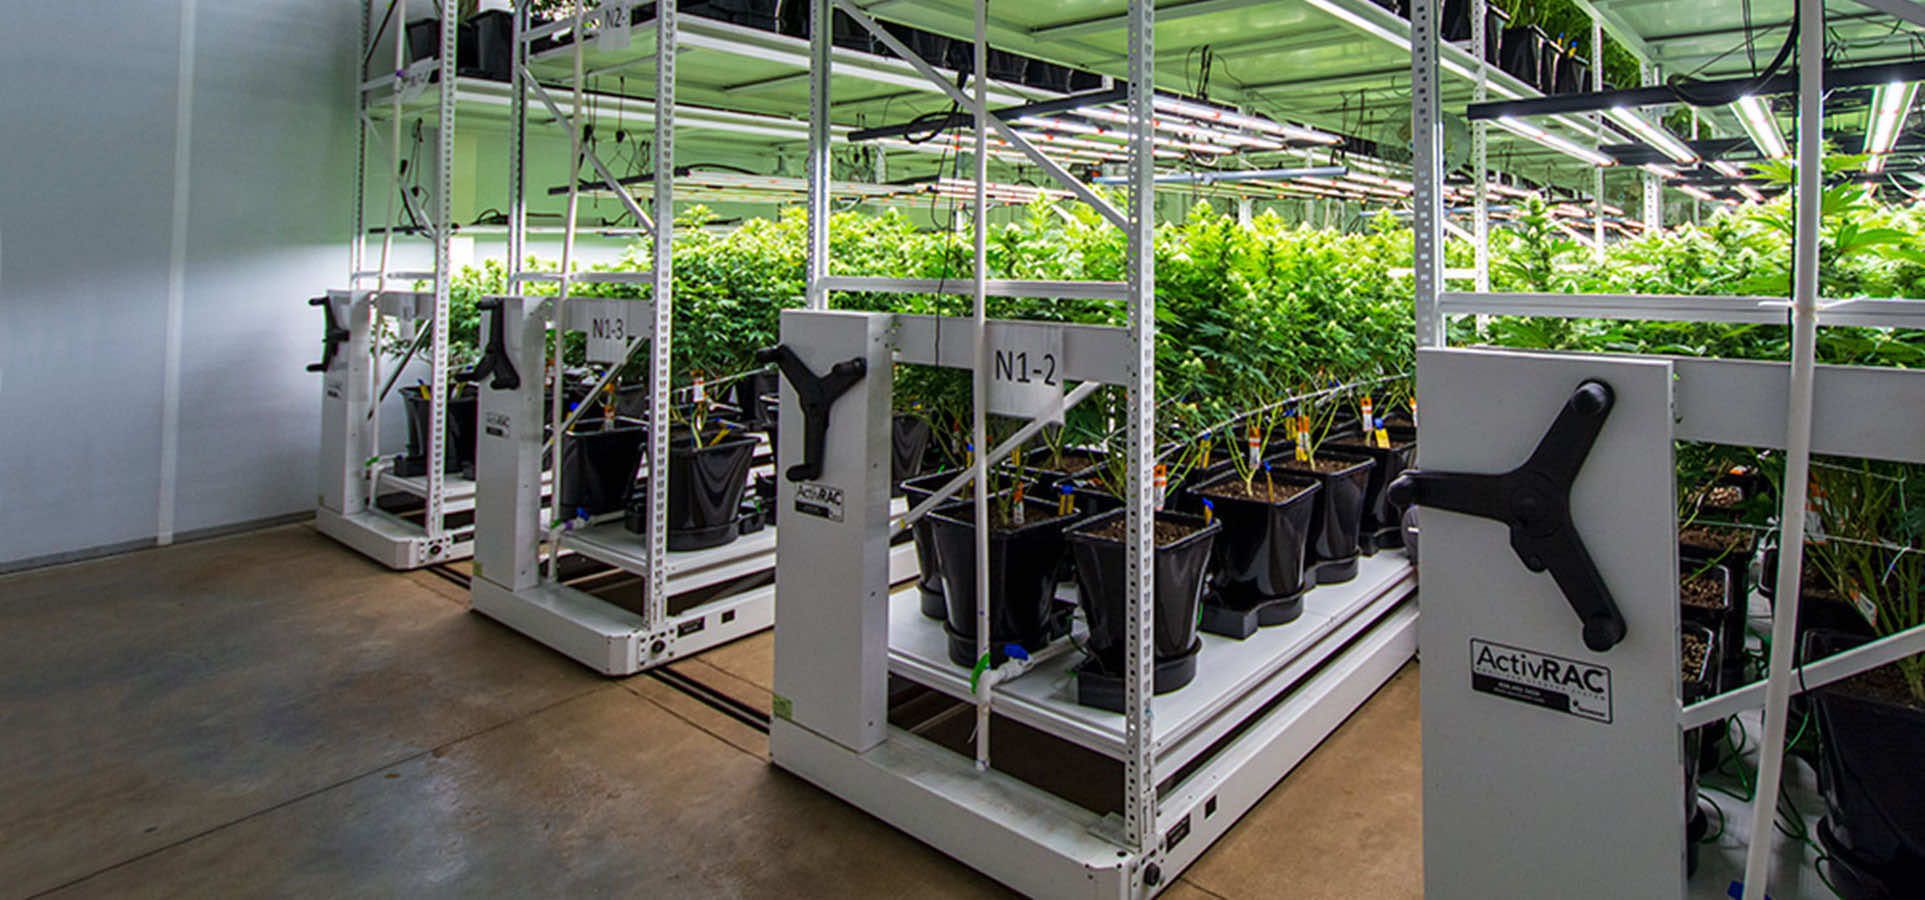 cannabis on grow mobile system in an indoor grow facility